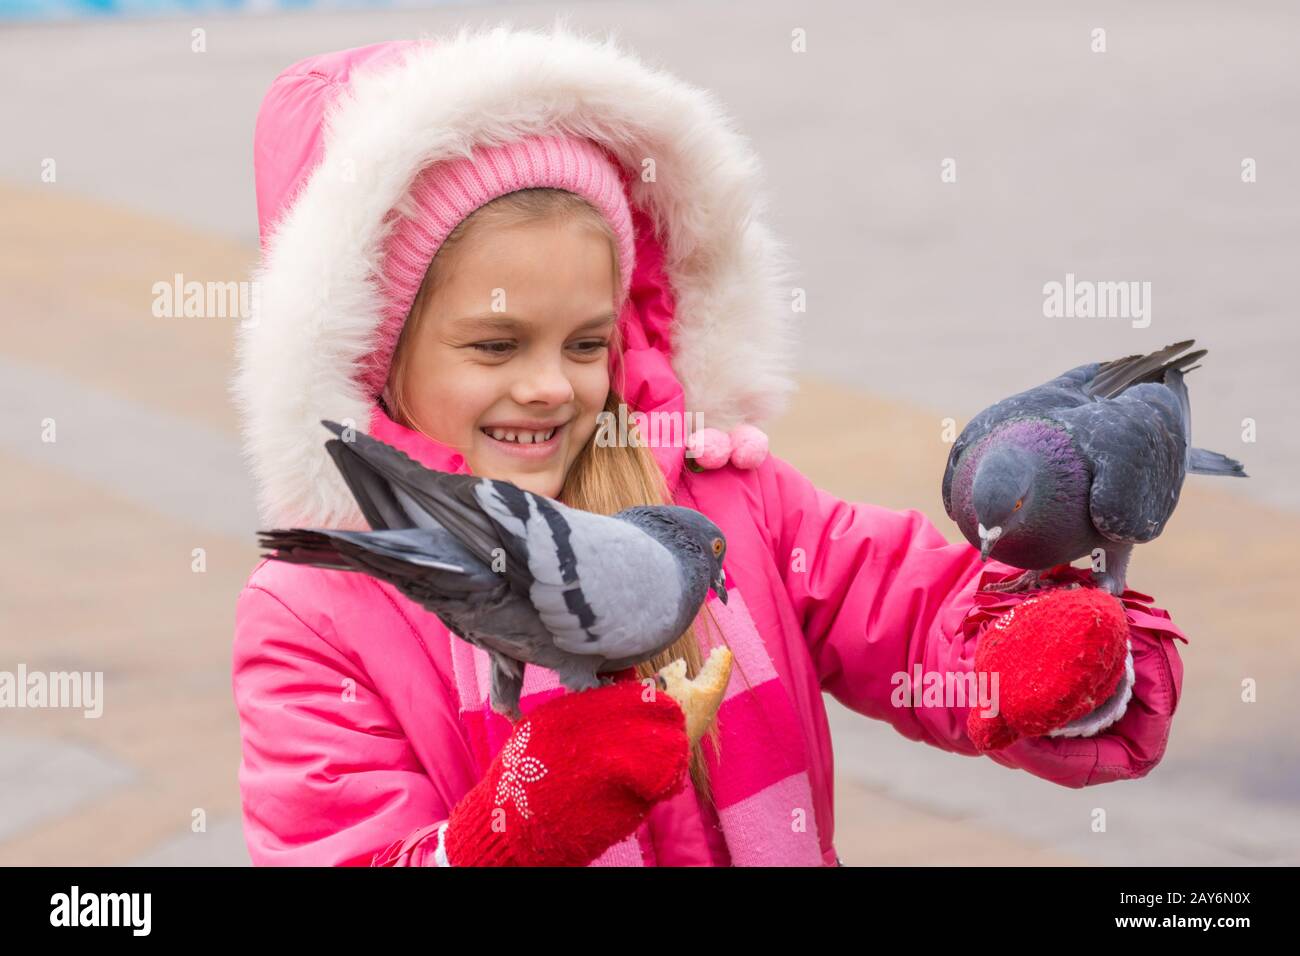 girl in a pink jacket is feeding bread to the pigeons hands Stock Photo